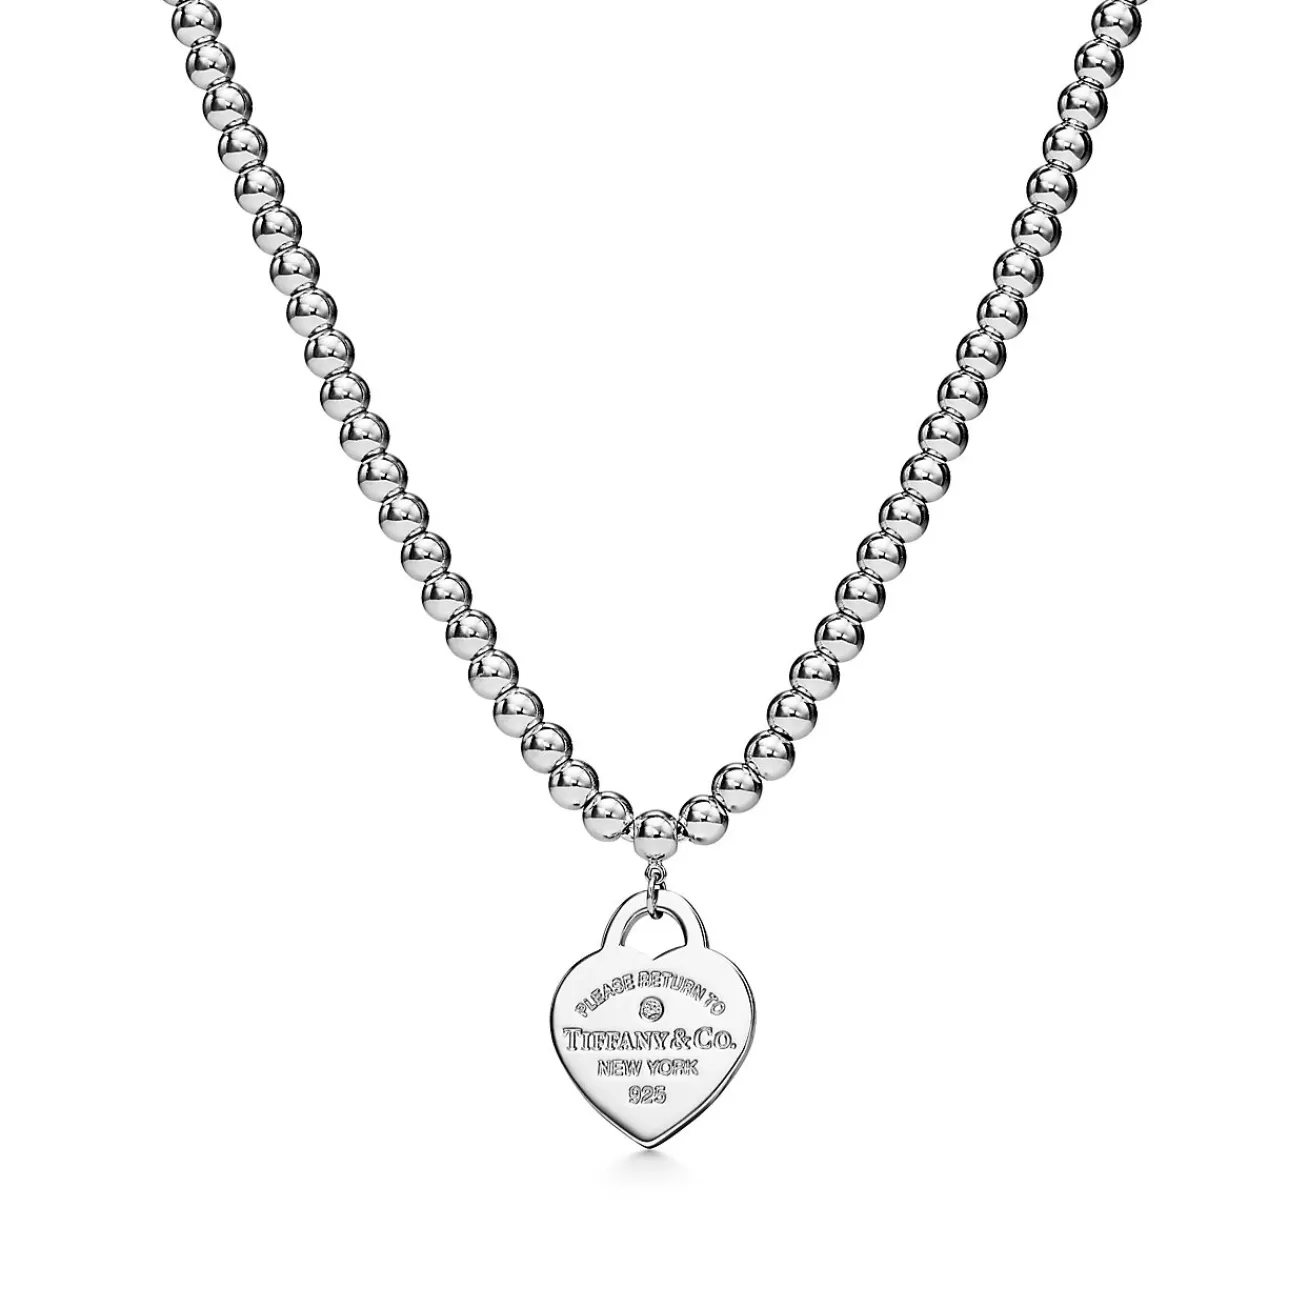 Tiffany & Co. Return to Tiffany® Heart Tag Bead Necklace in Silver with a Diamond, Small | ^ Necklaces & Pendants | Sterling Silver Jewelry